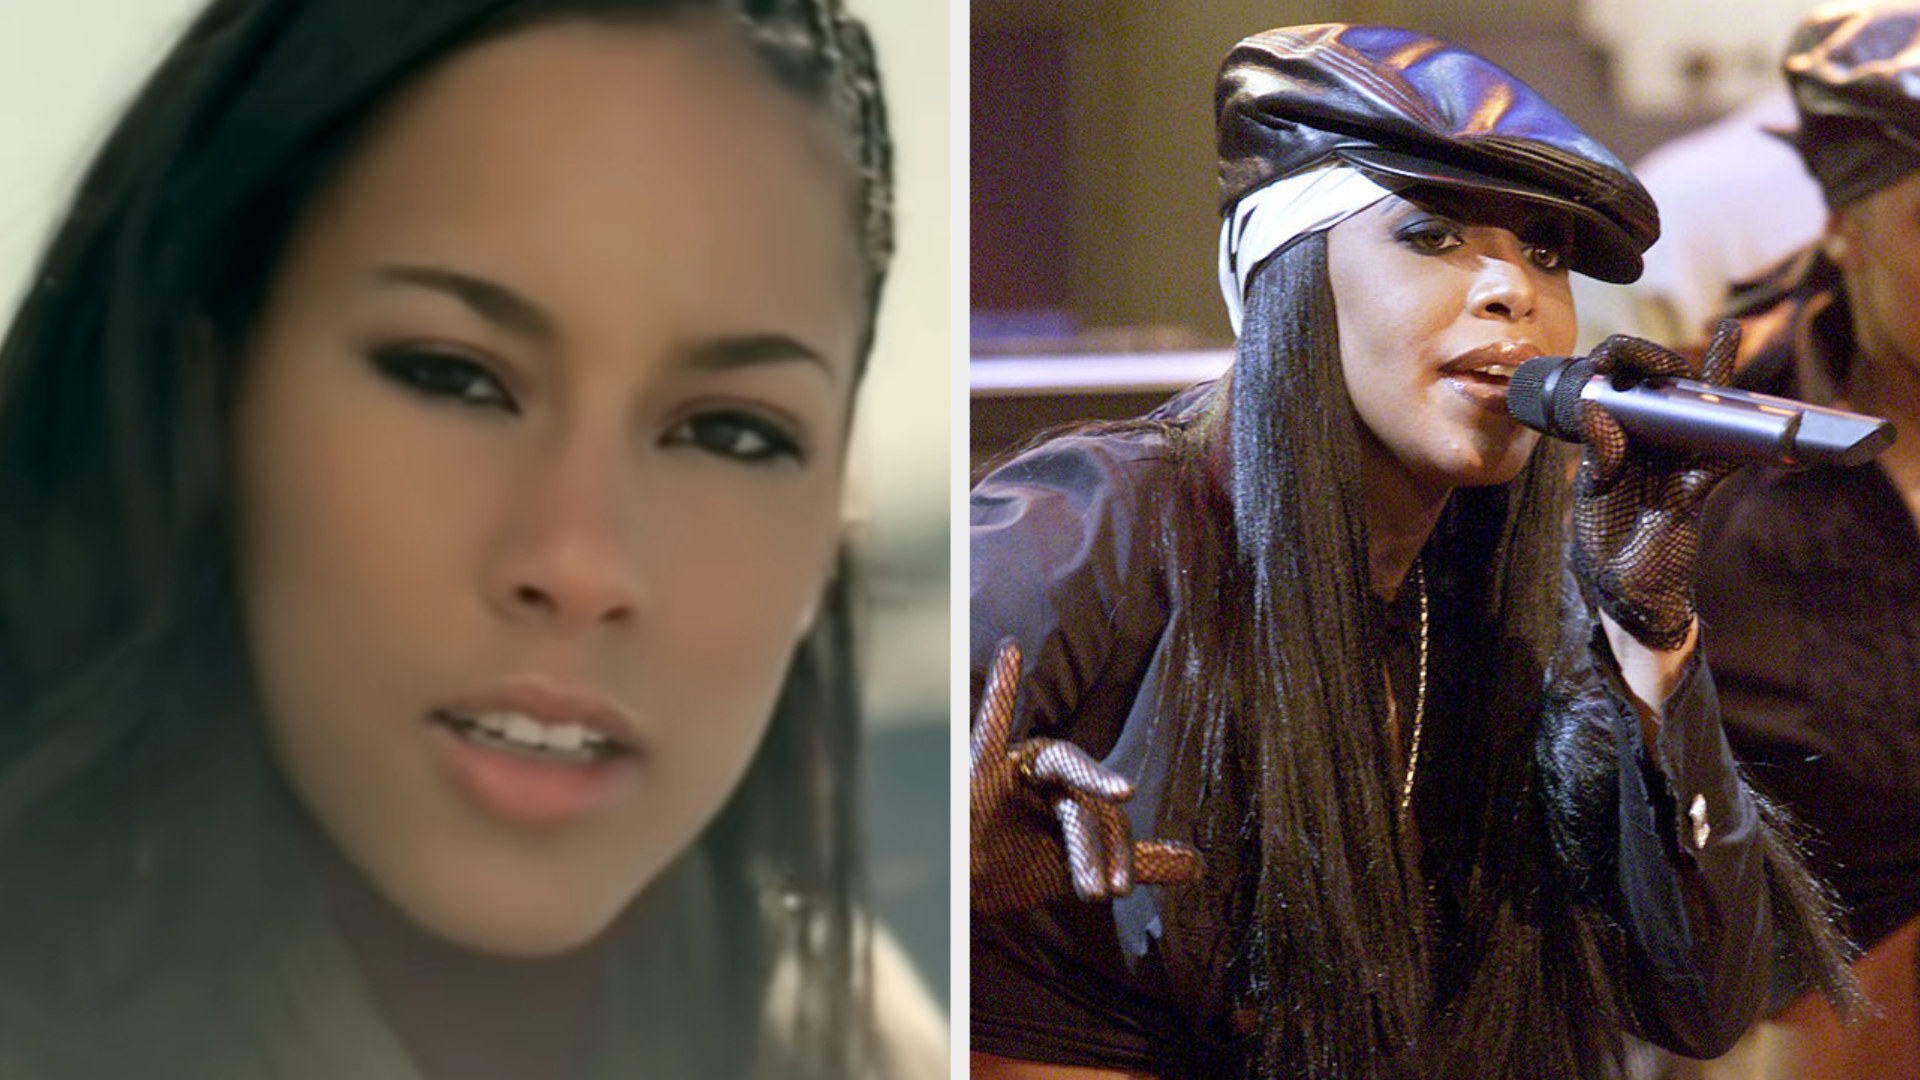 Alicia Keys singing outside in the winter in the &quot;If I Ain&#x27;t Got You&quot; music video; Aaliyah wearing a hat and gloves while performing on a TV show